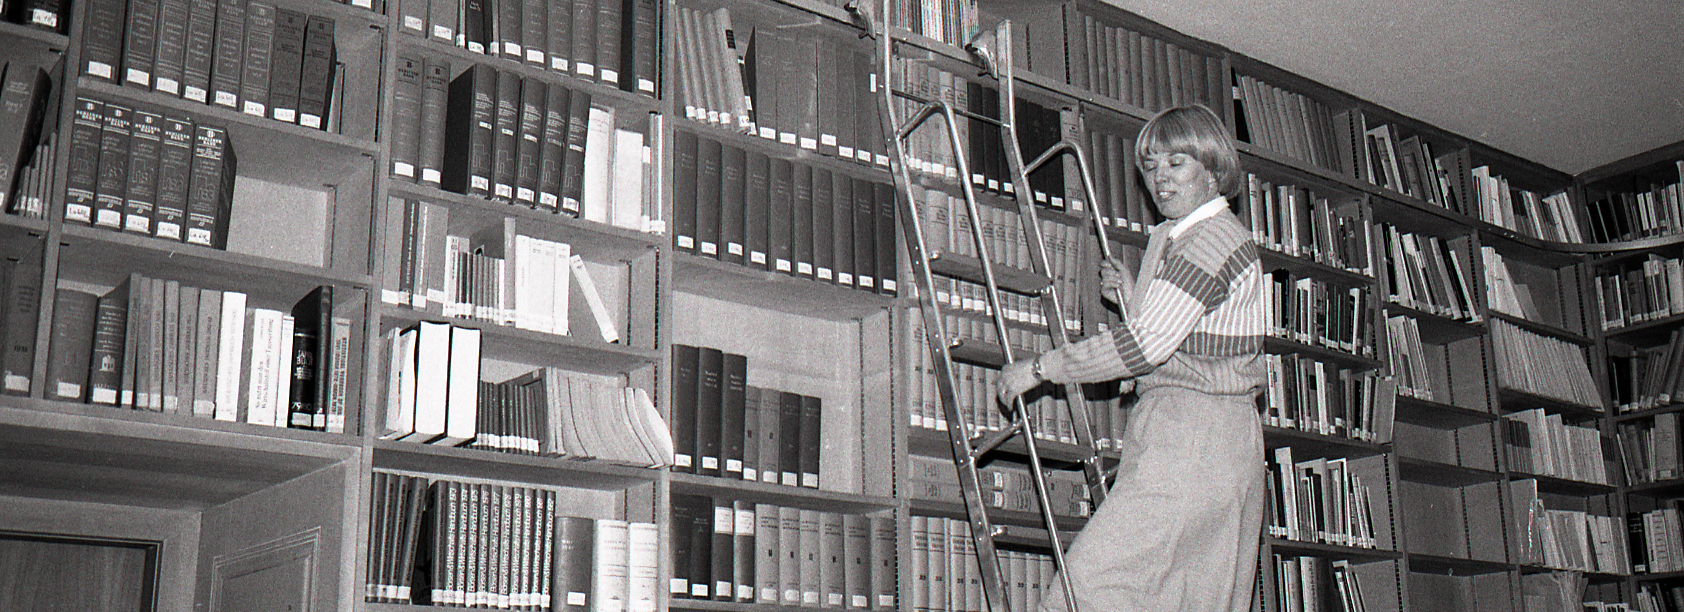 Black and white archive photo of a woman on a library ladder